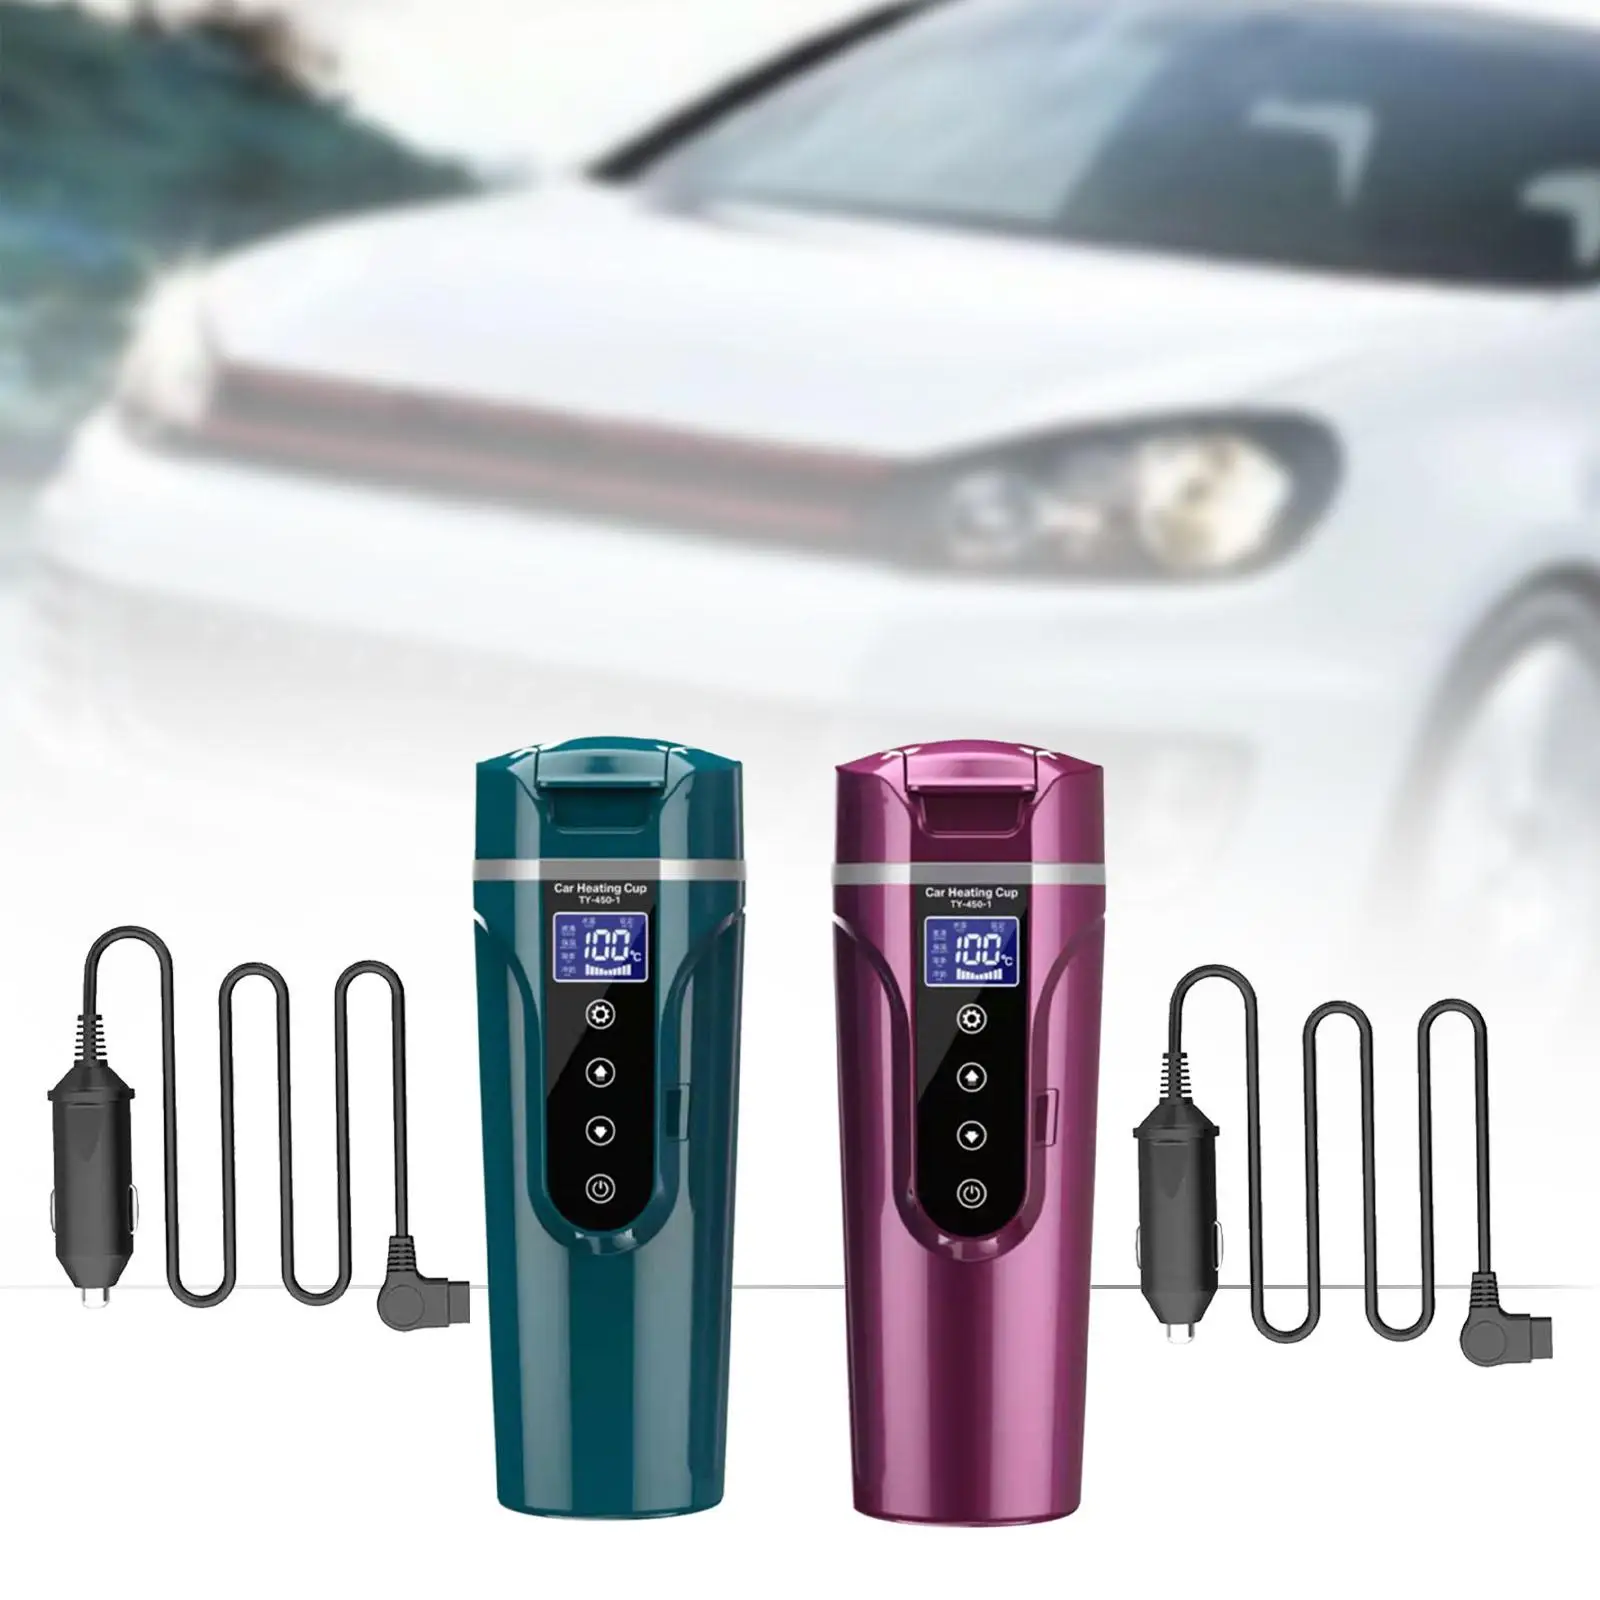 12V/24V Travel Car Truck Kettle Quick Heating Stainless Steel Variable Temp Control Car Heating Cup for Milk Auto Travel Outdoor